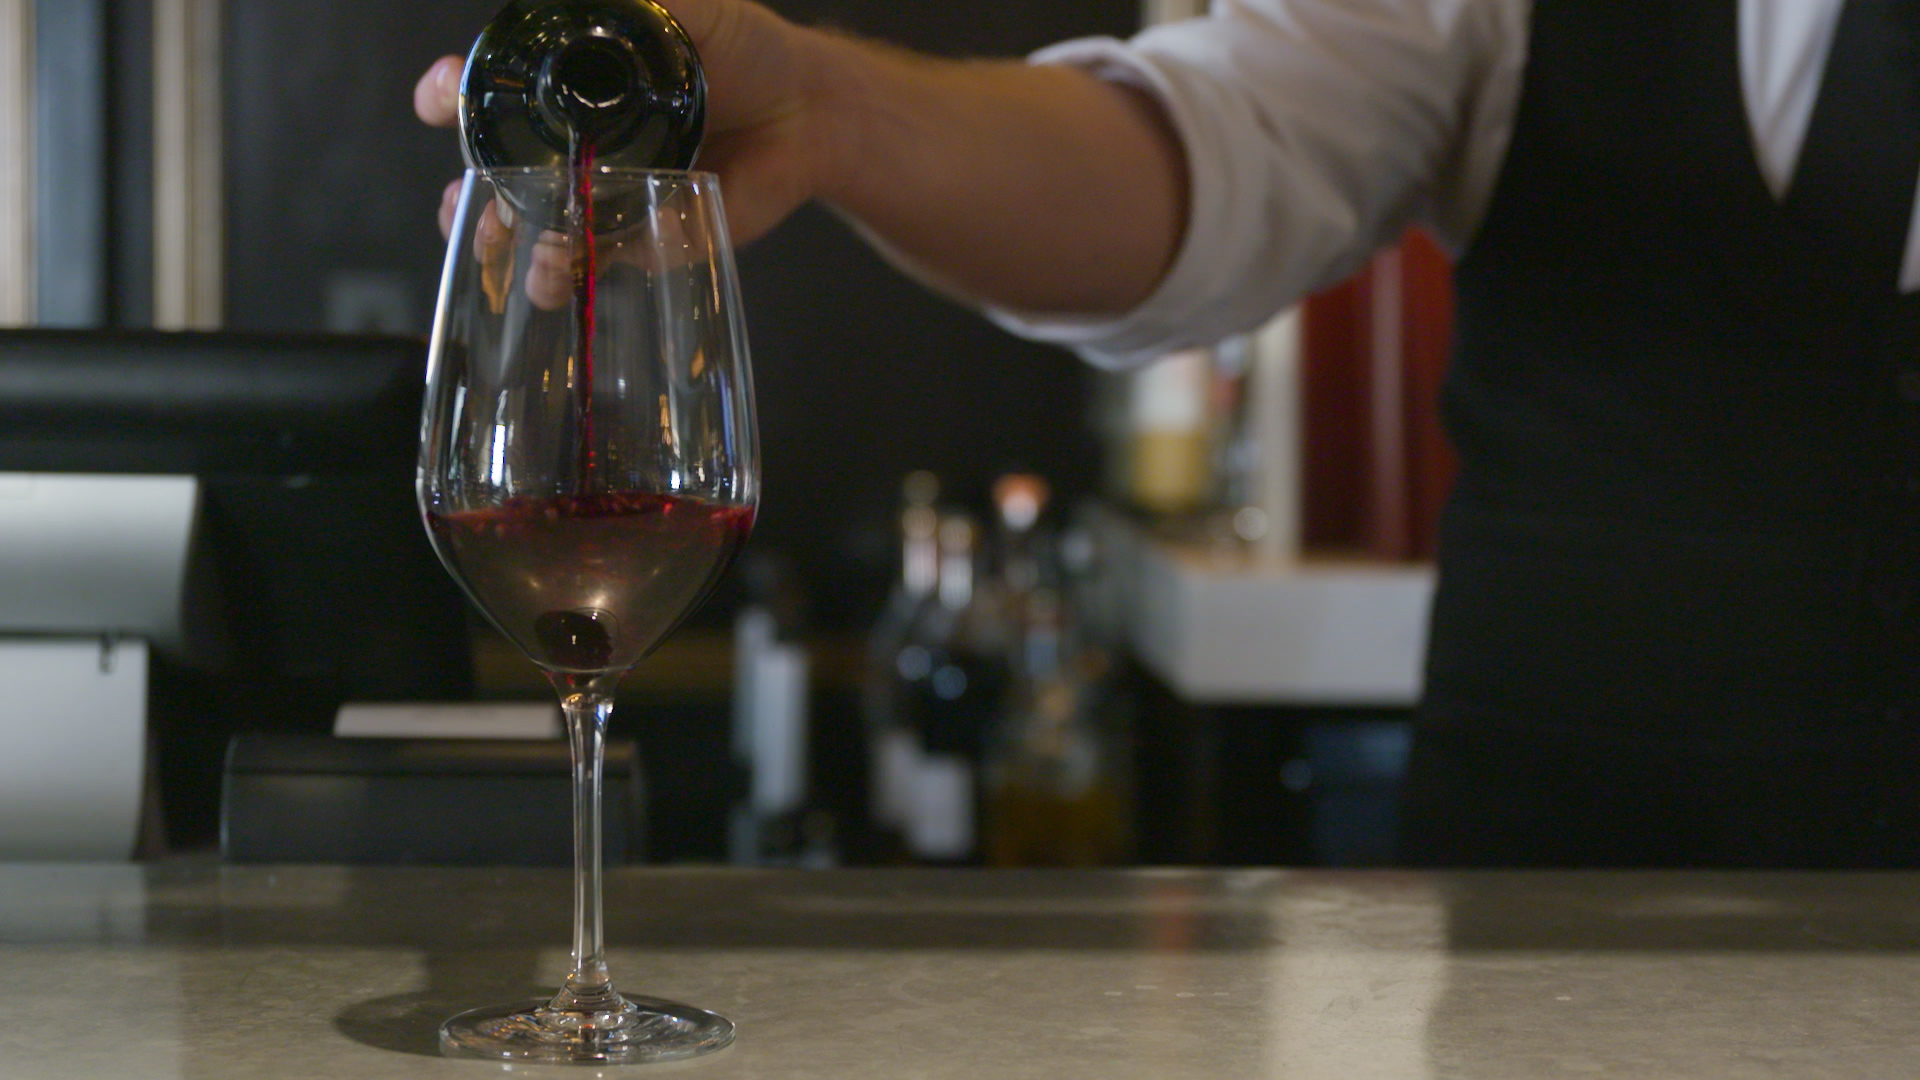 Uncorked: A Newsy Investigation Of The Elite Wine World